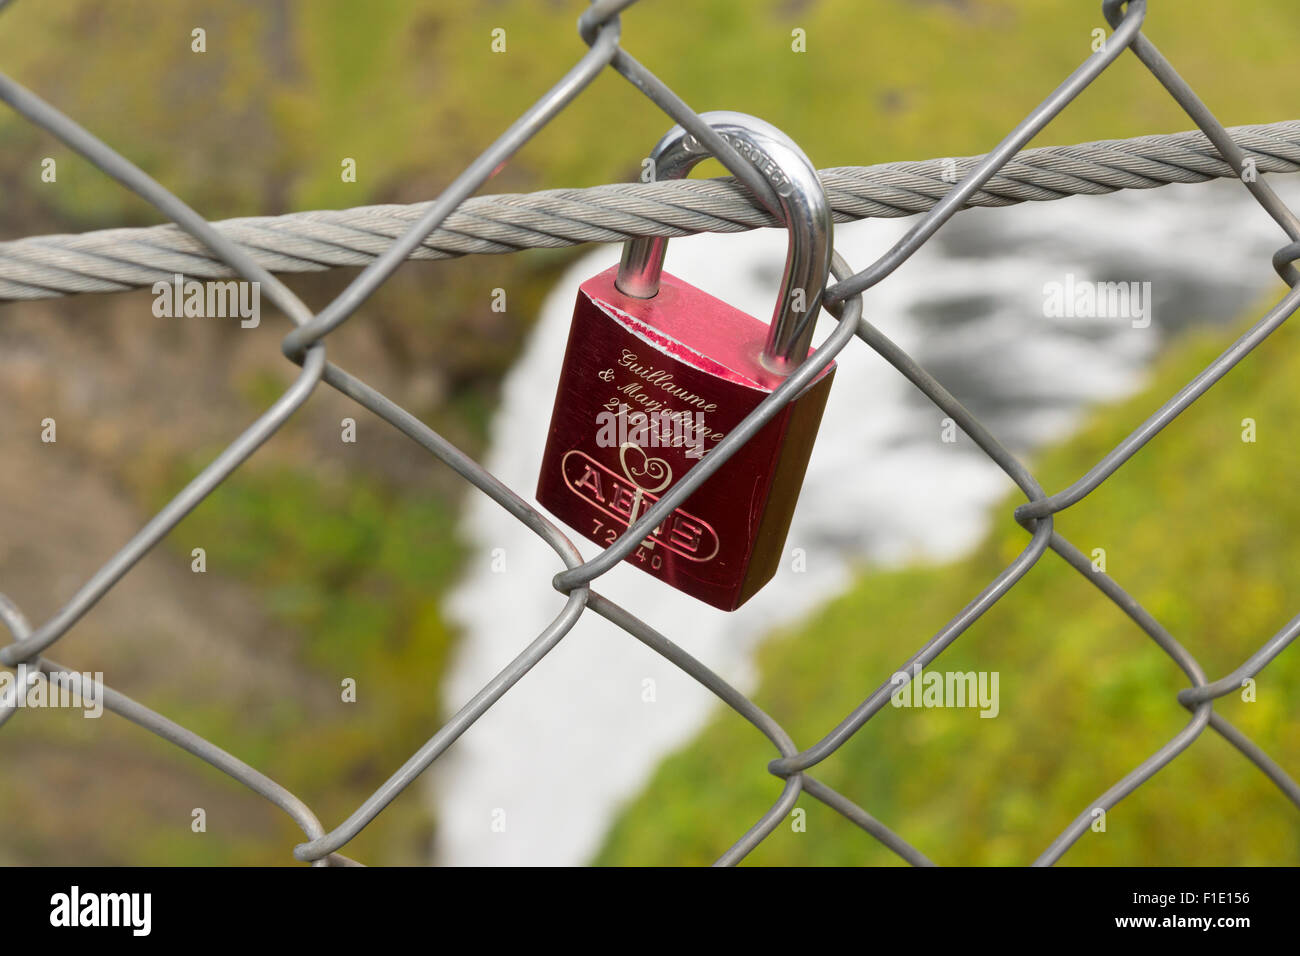 A love lock attached to fencing around the viewing platform above Skogafoss waterfall in Iceland. Theme: environmental damage, vandalism Stock Photo